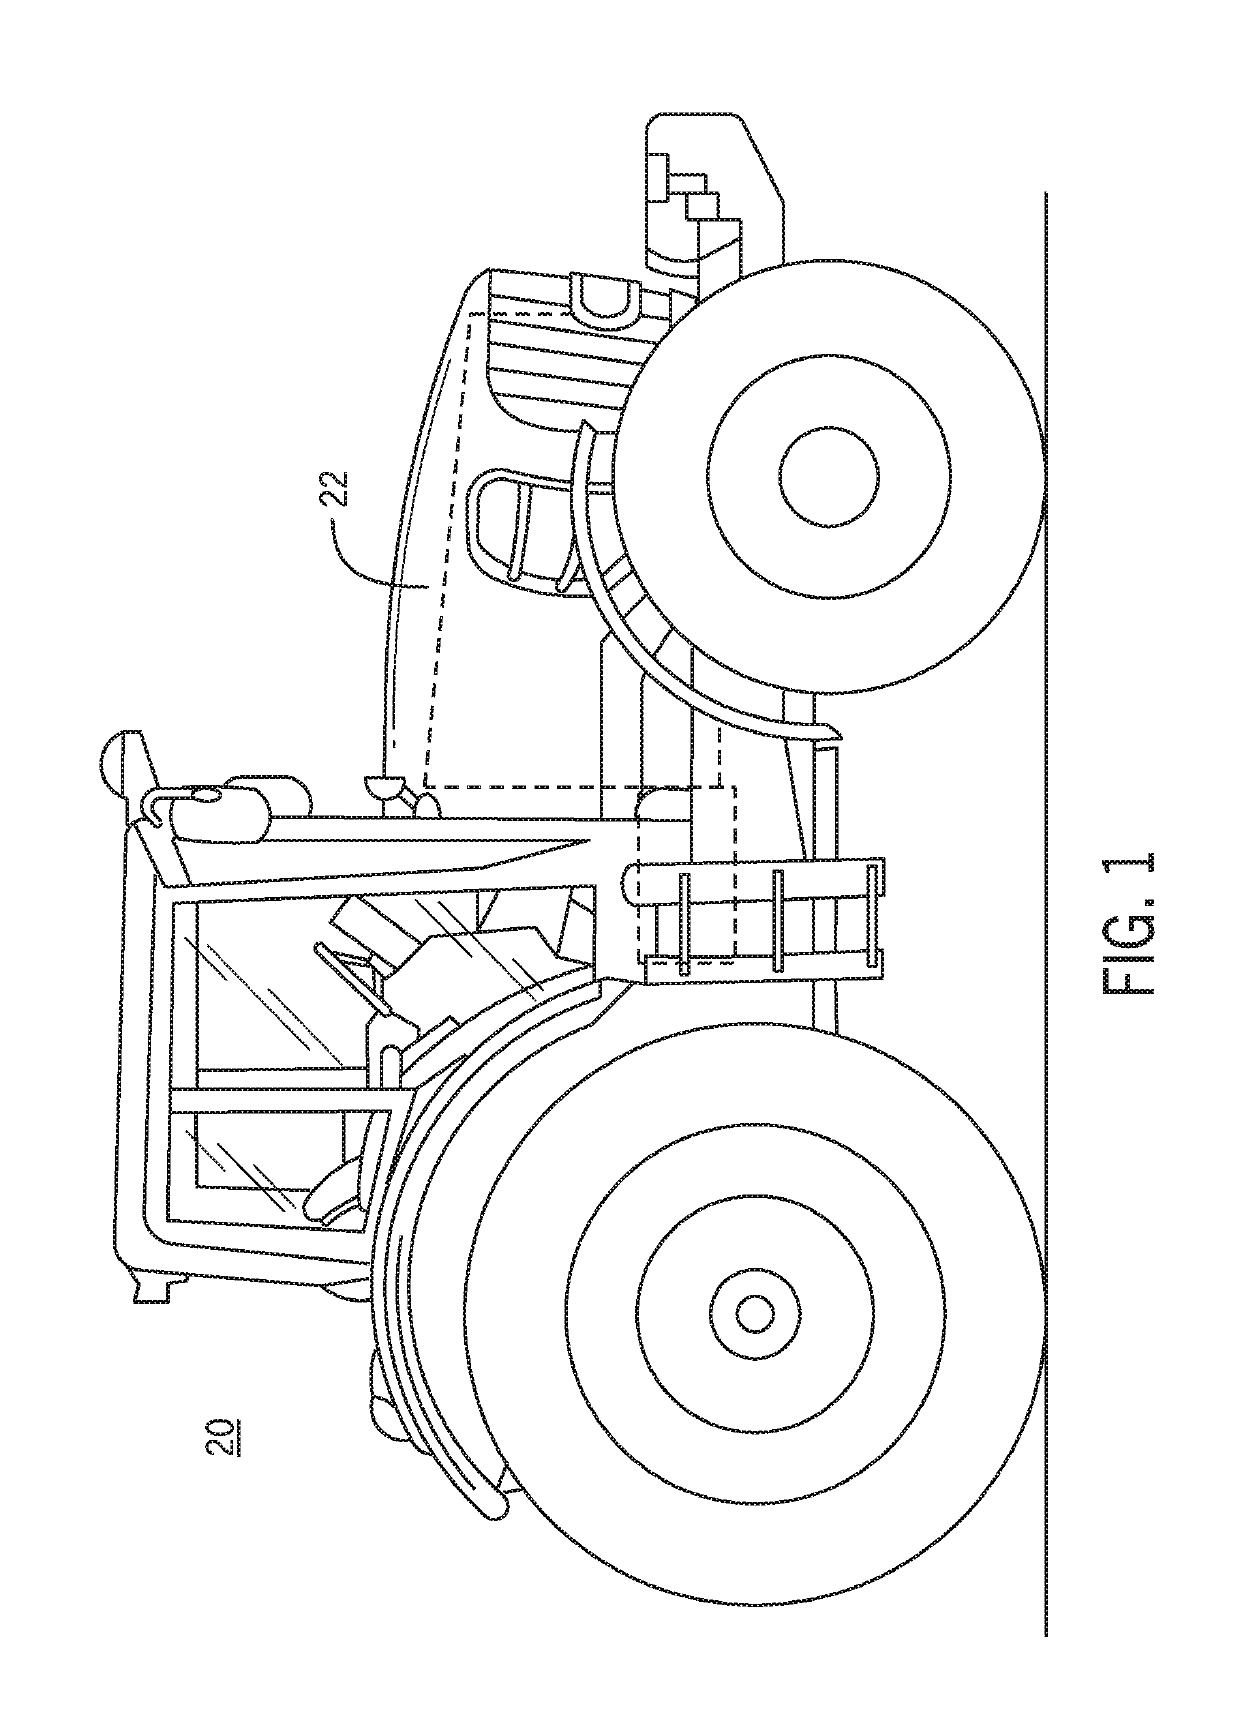 Multi-mode infinitely variable transmission that provides seamless shifting